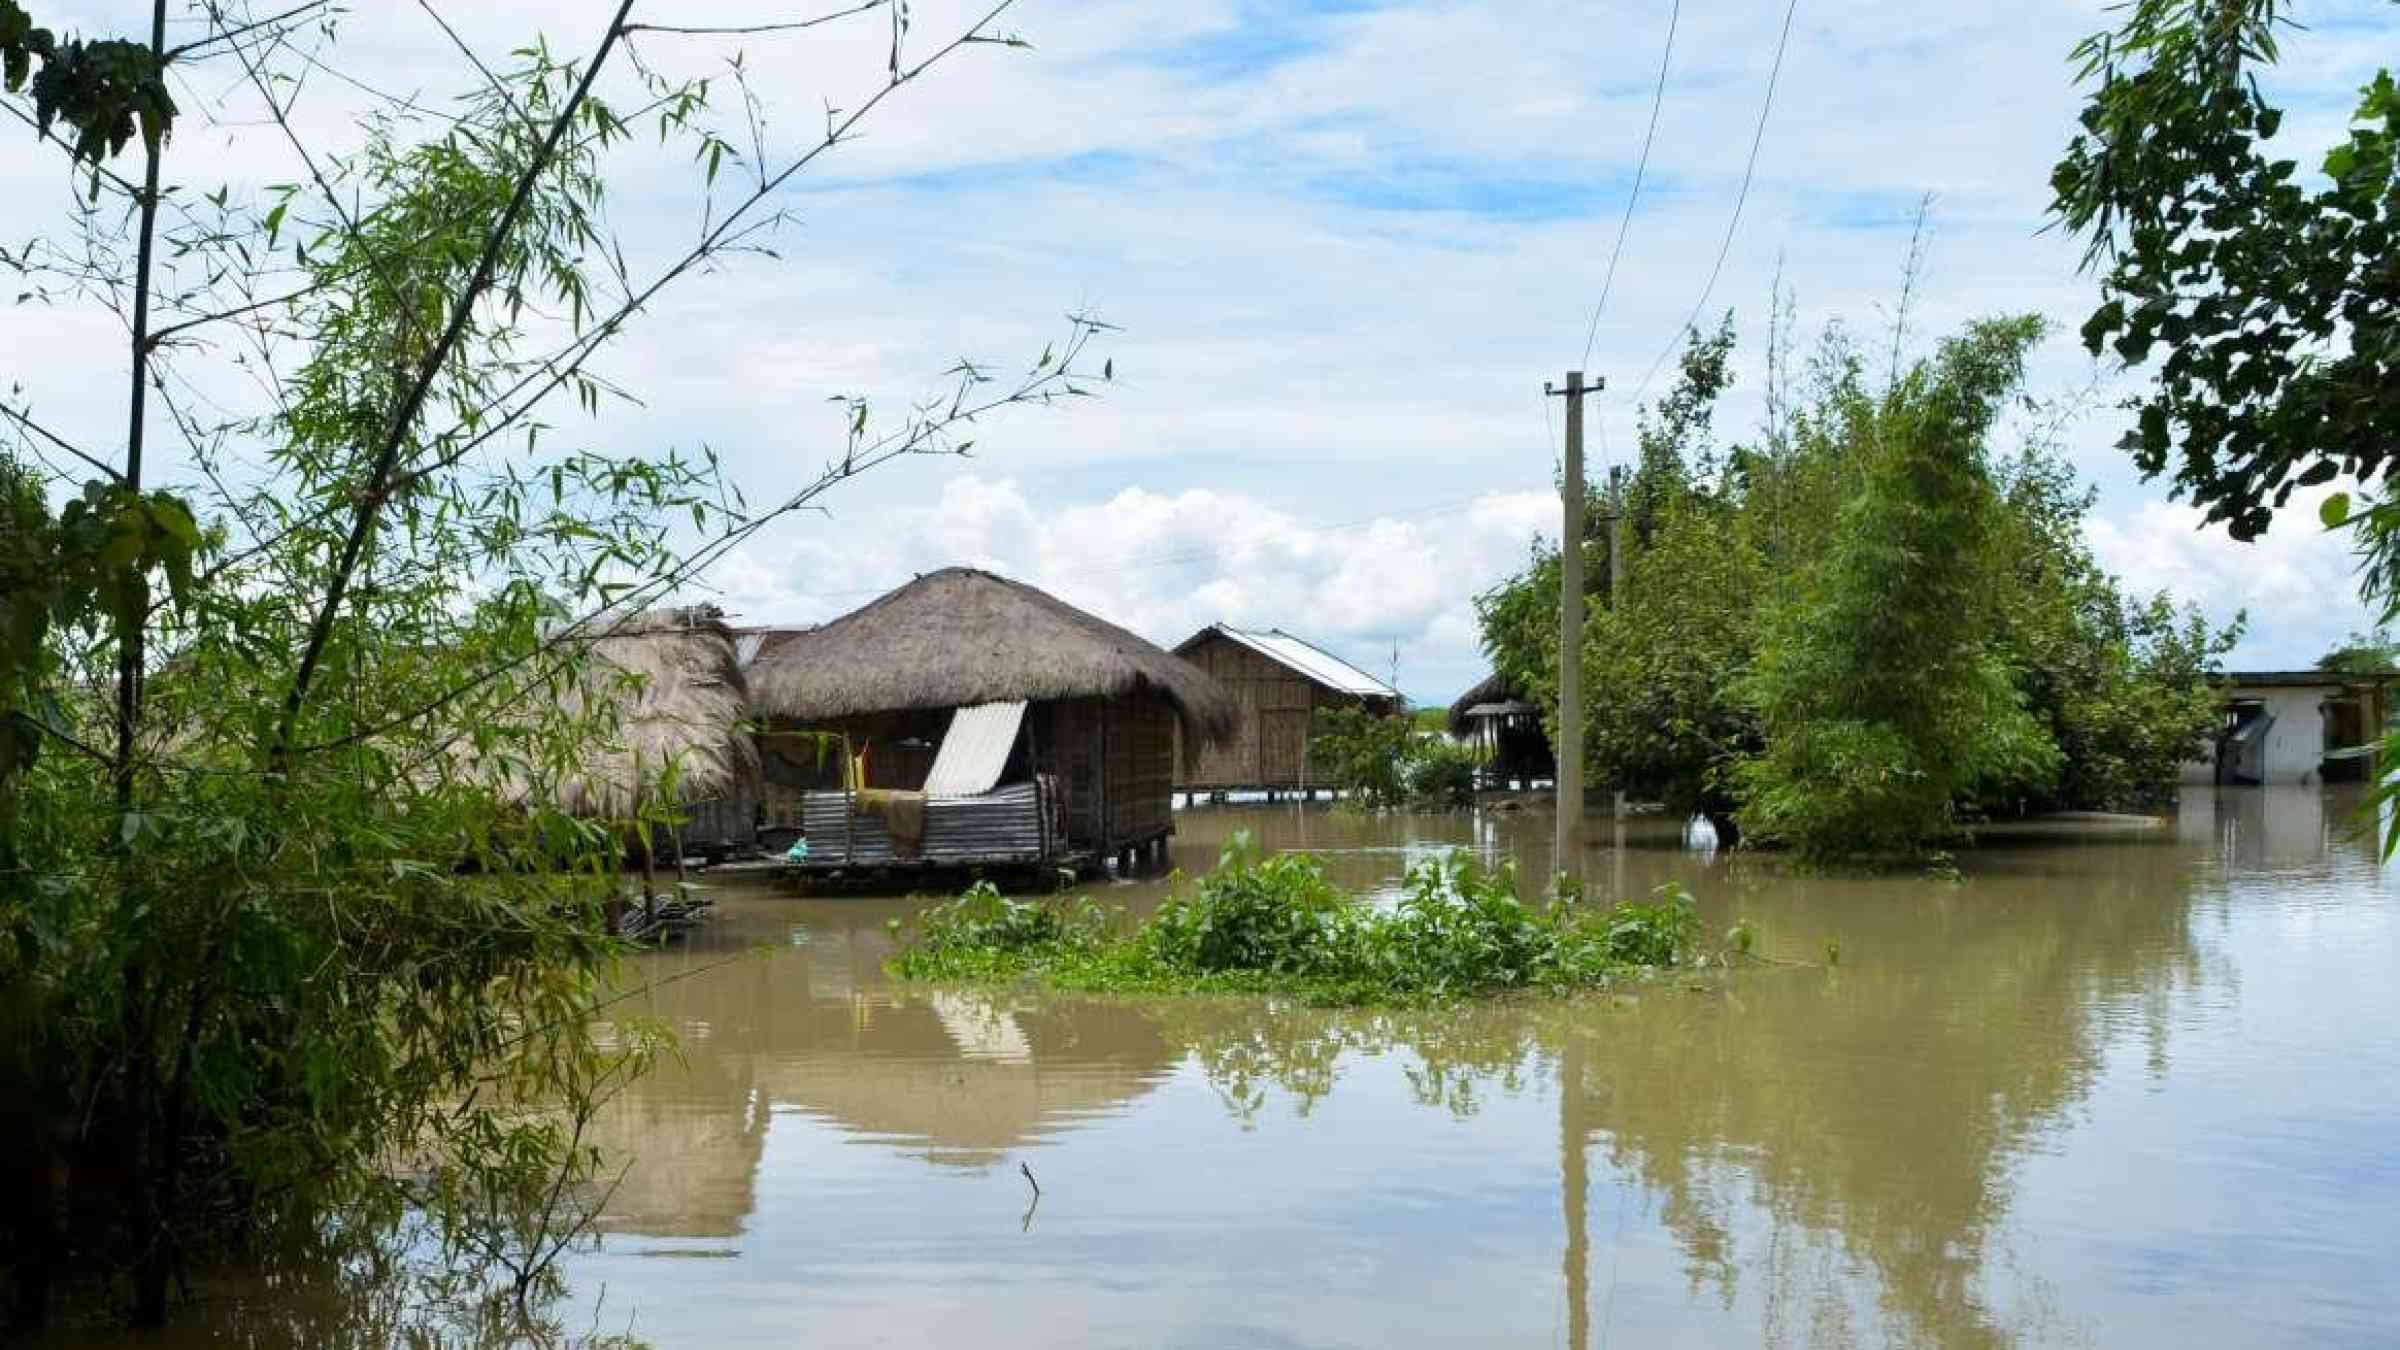 Flood in Assam caused by the overflow of the river Brahmaputra.